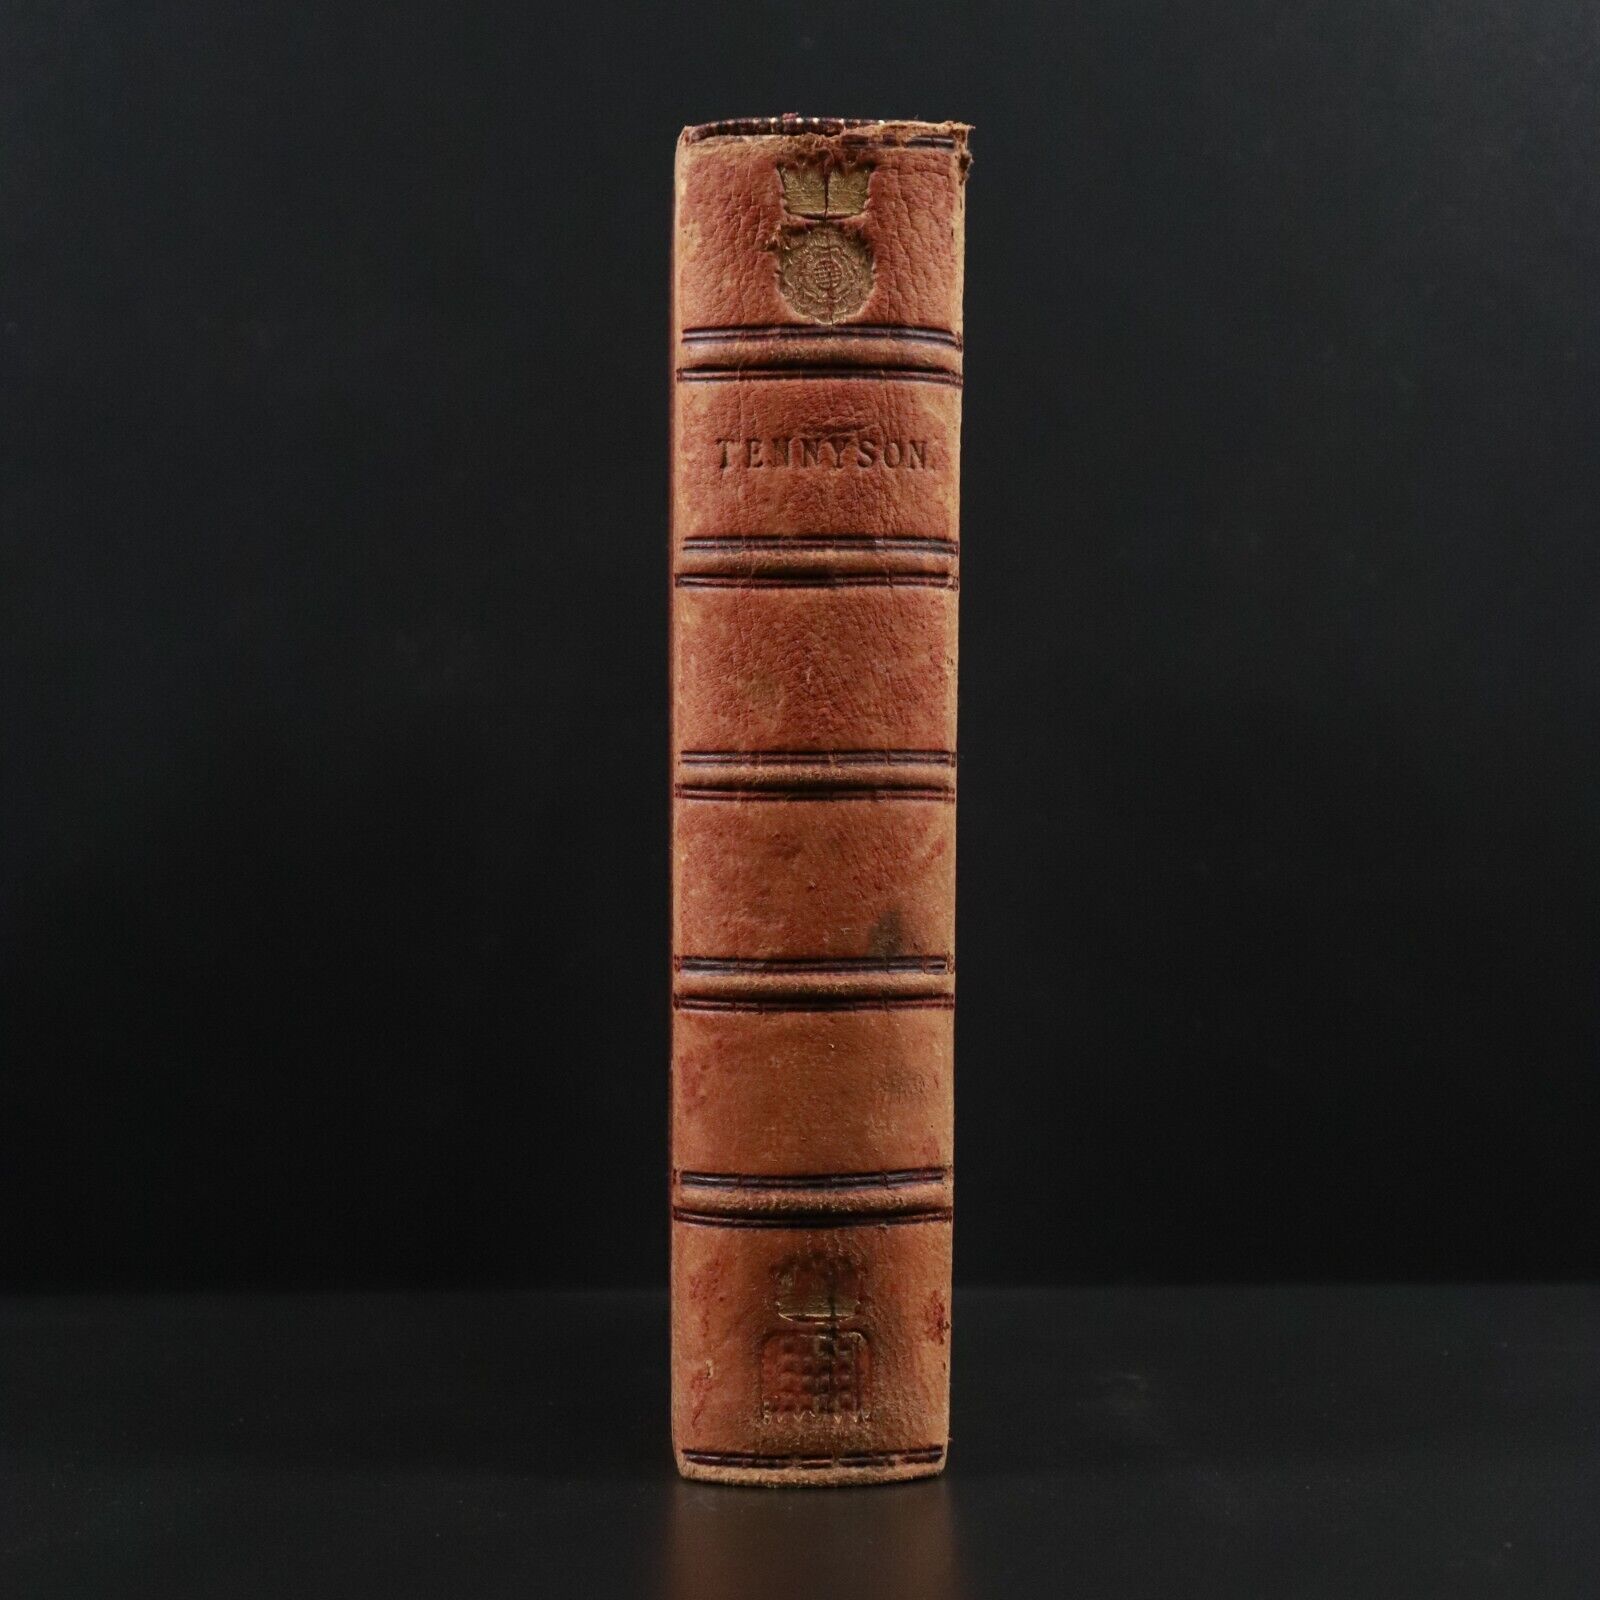 1878 The Works Of Alfred Tennyson Poet Laureate Antique Poetry Book Leather Bind